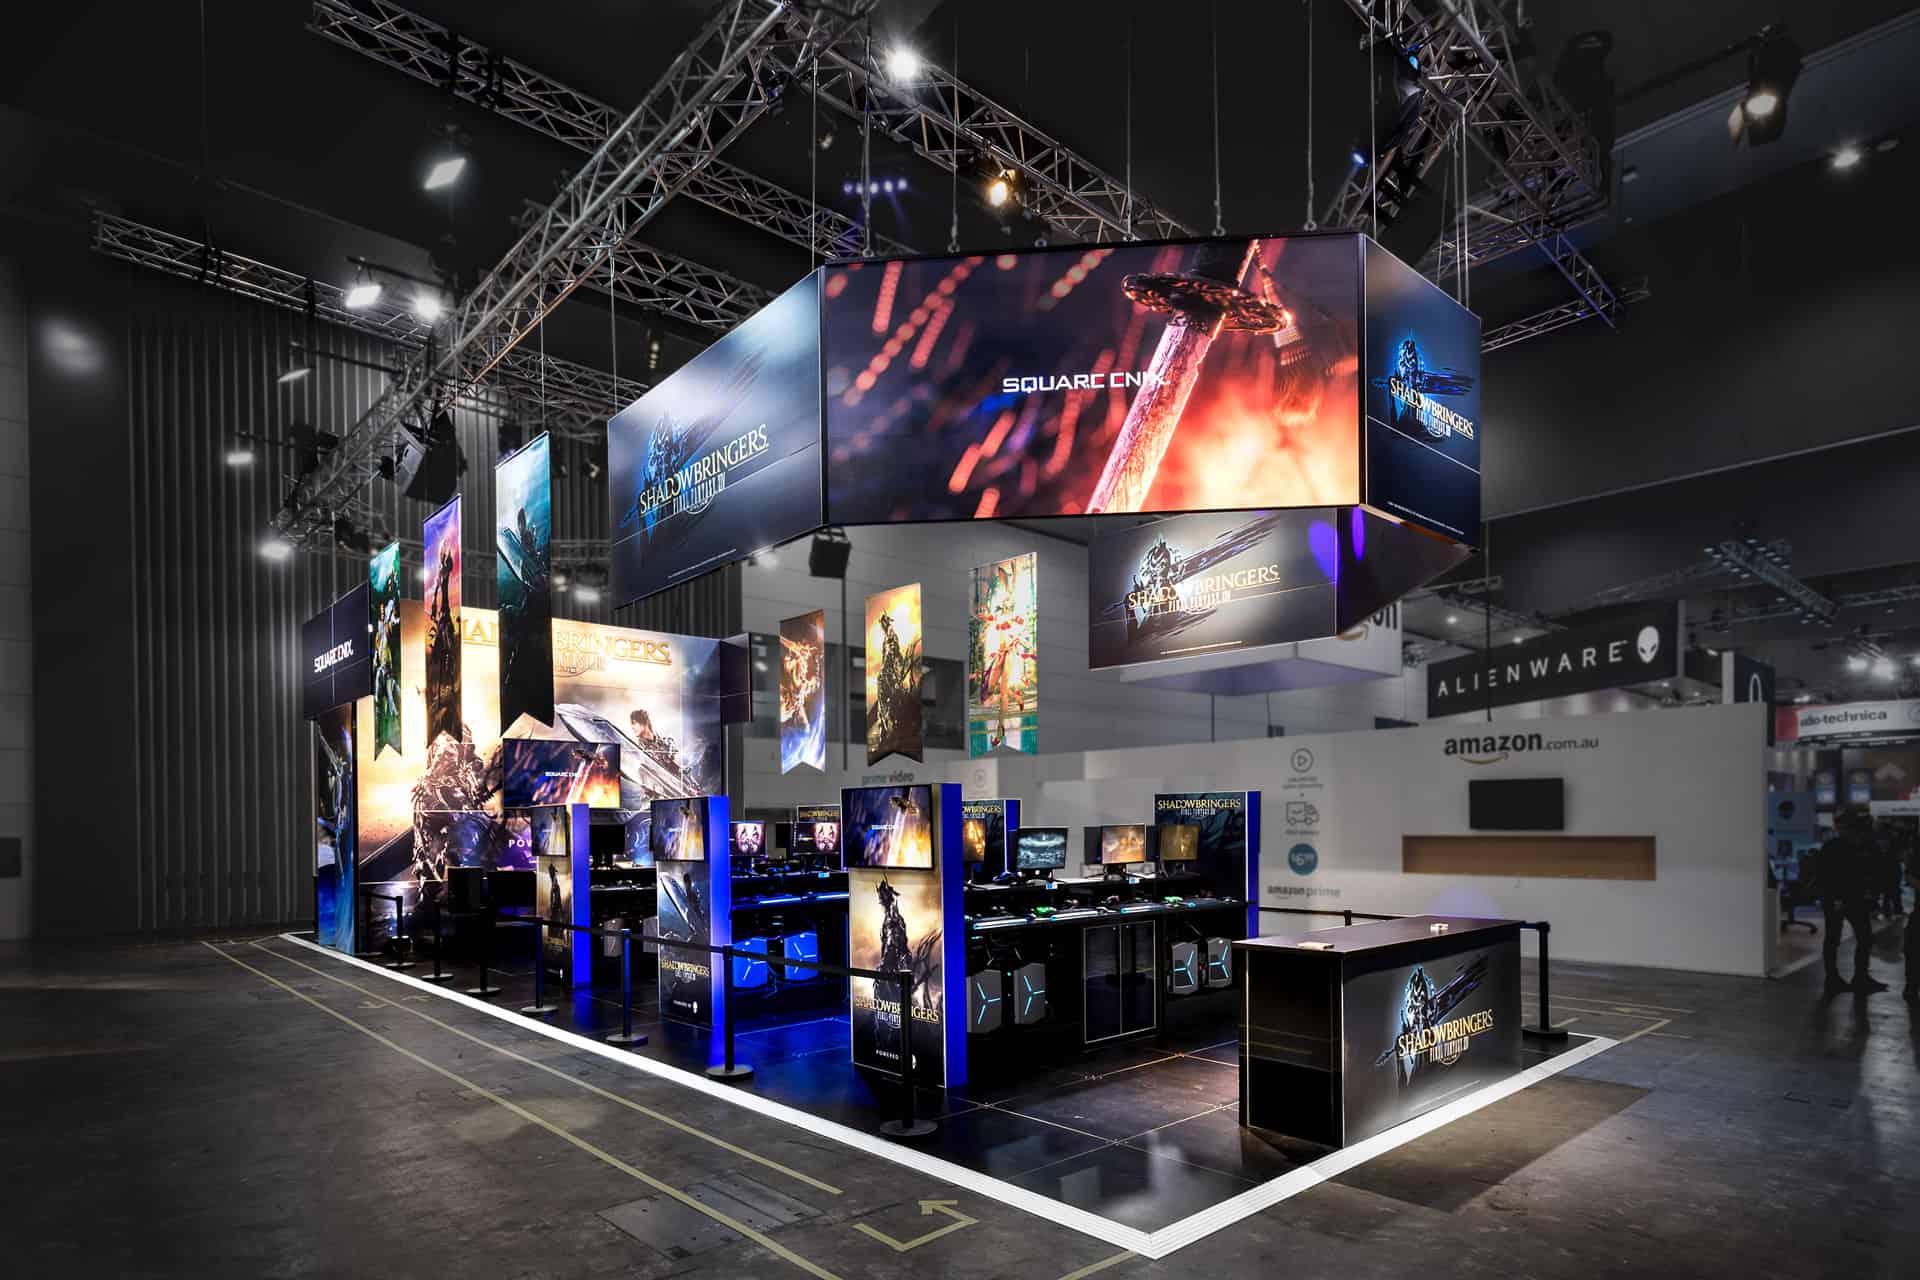 SquareEnix custom showtopper exhibition stand at PAX 2019 by Expocentric.com.au